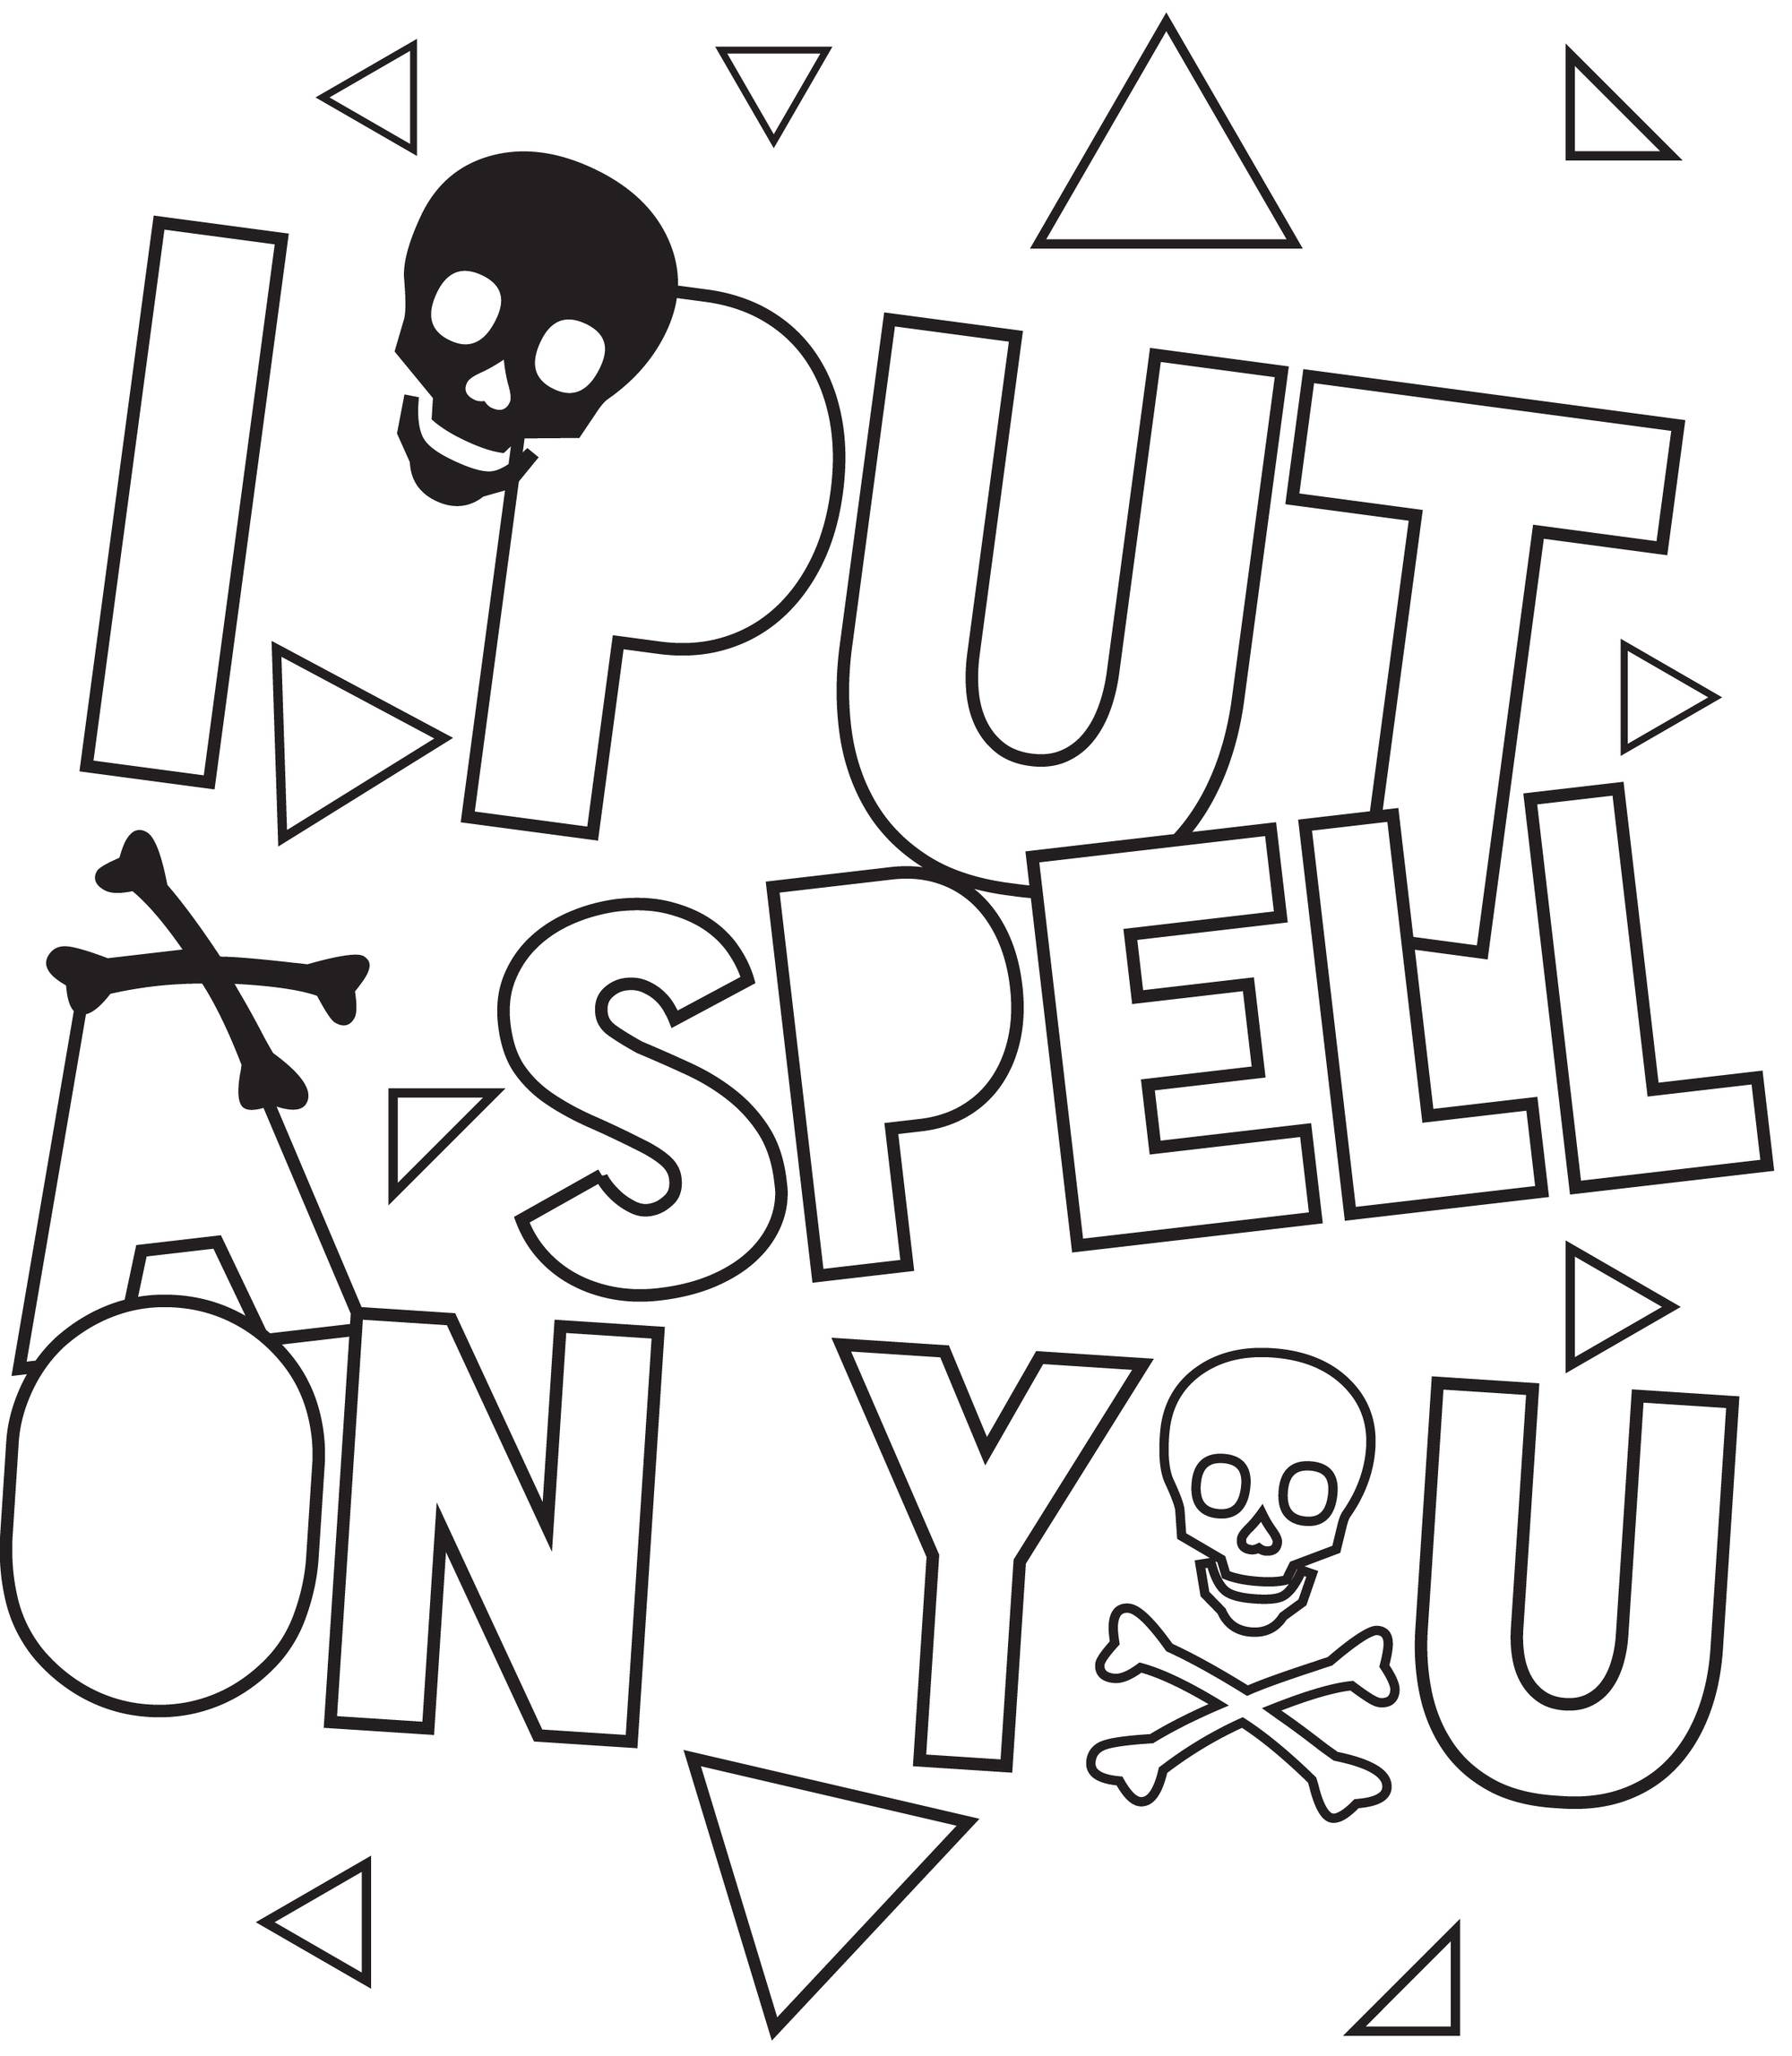 A design uses black and white block letters about putting spells on people.